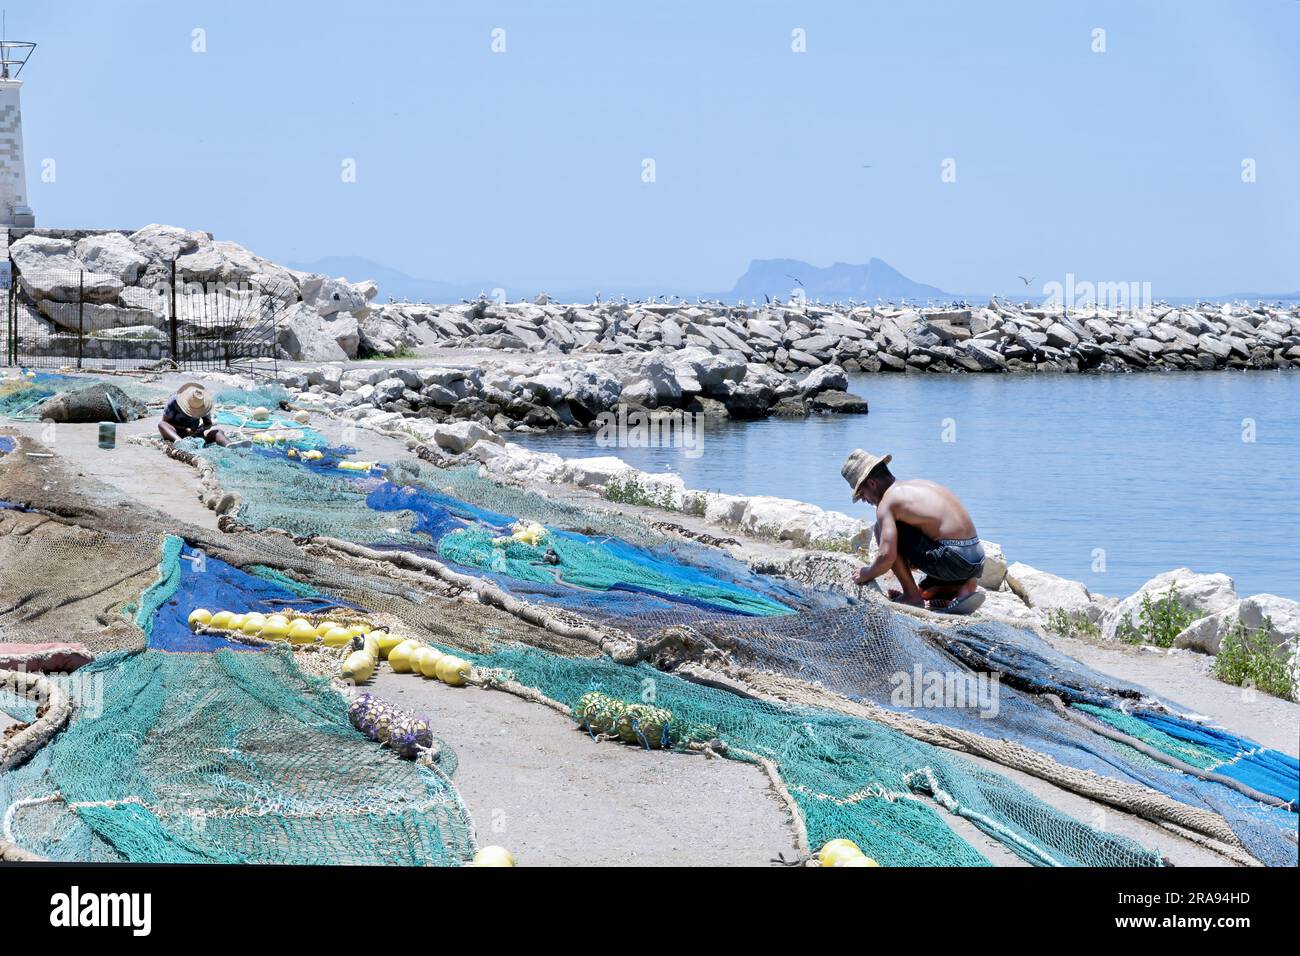 Two fisherman repairing their fishing nets on the fishing port dock side. The port is located in Estepona Spain with Gibraltar shown in the background Stock Photo